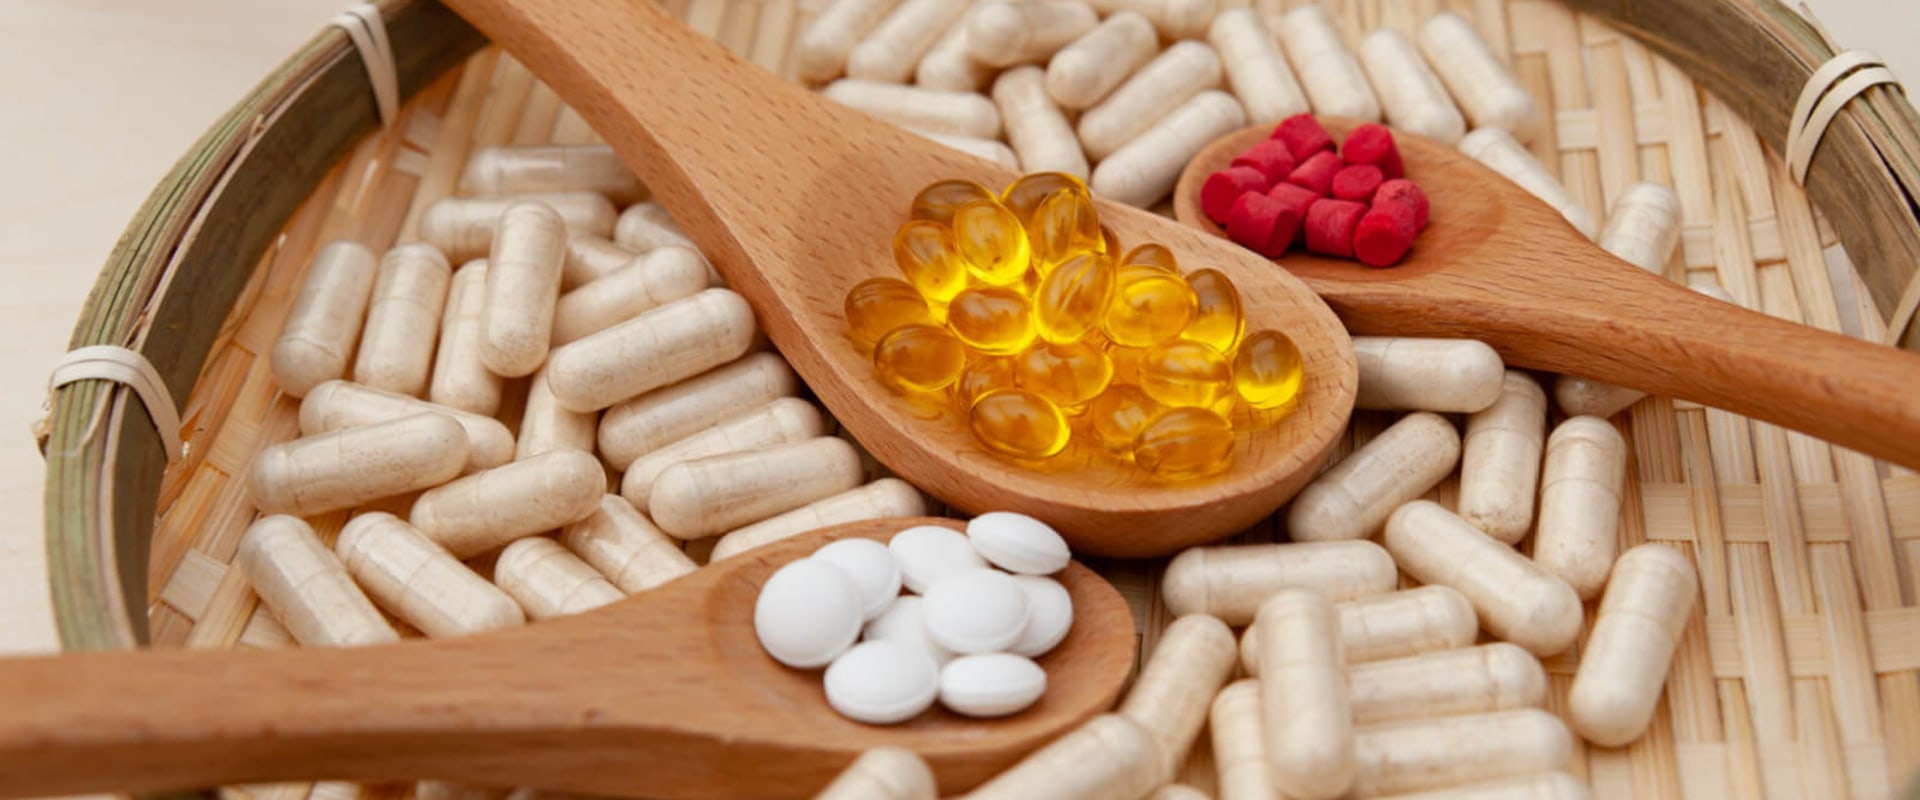 The Benefits of Vitamin E and Other Supplements for Alzheimer's Treatment